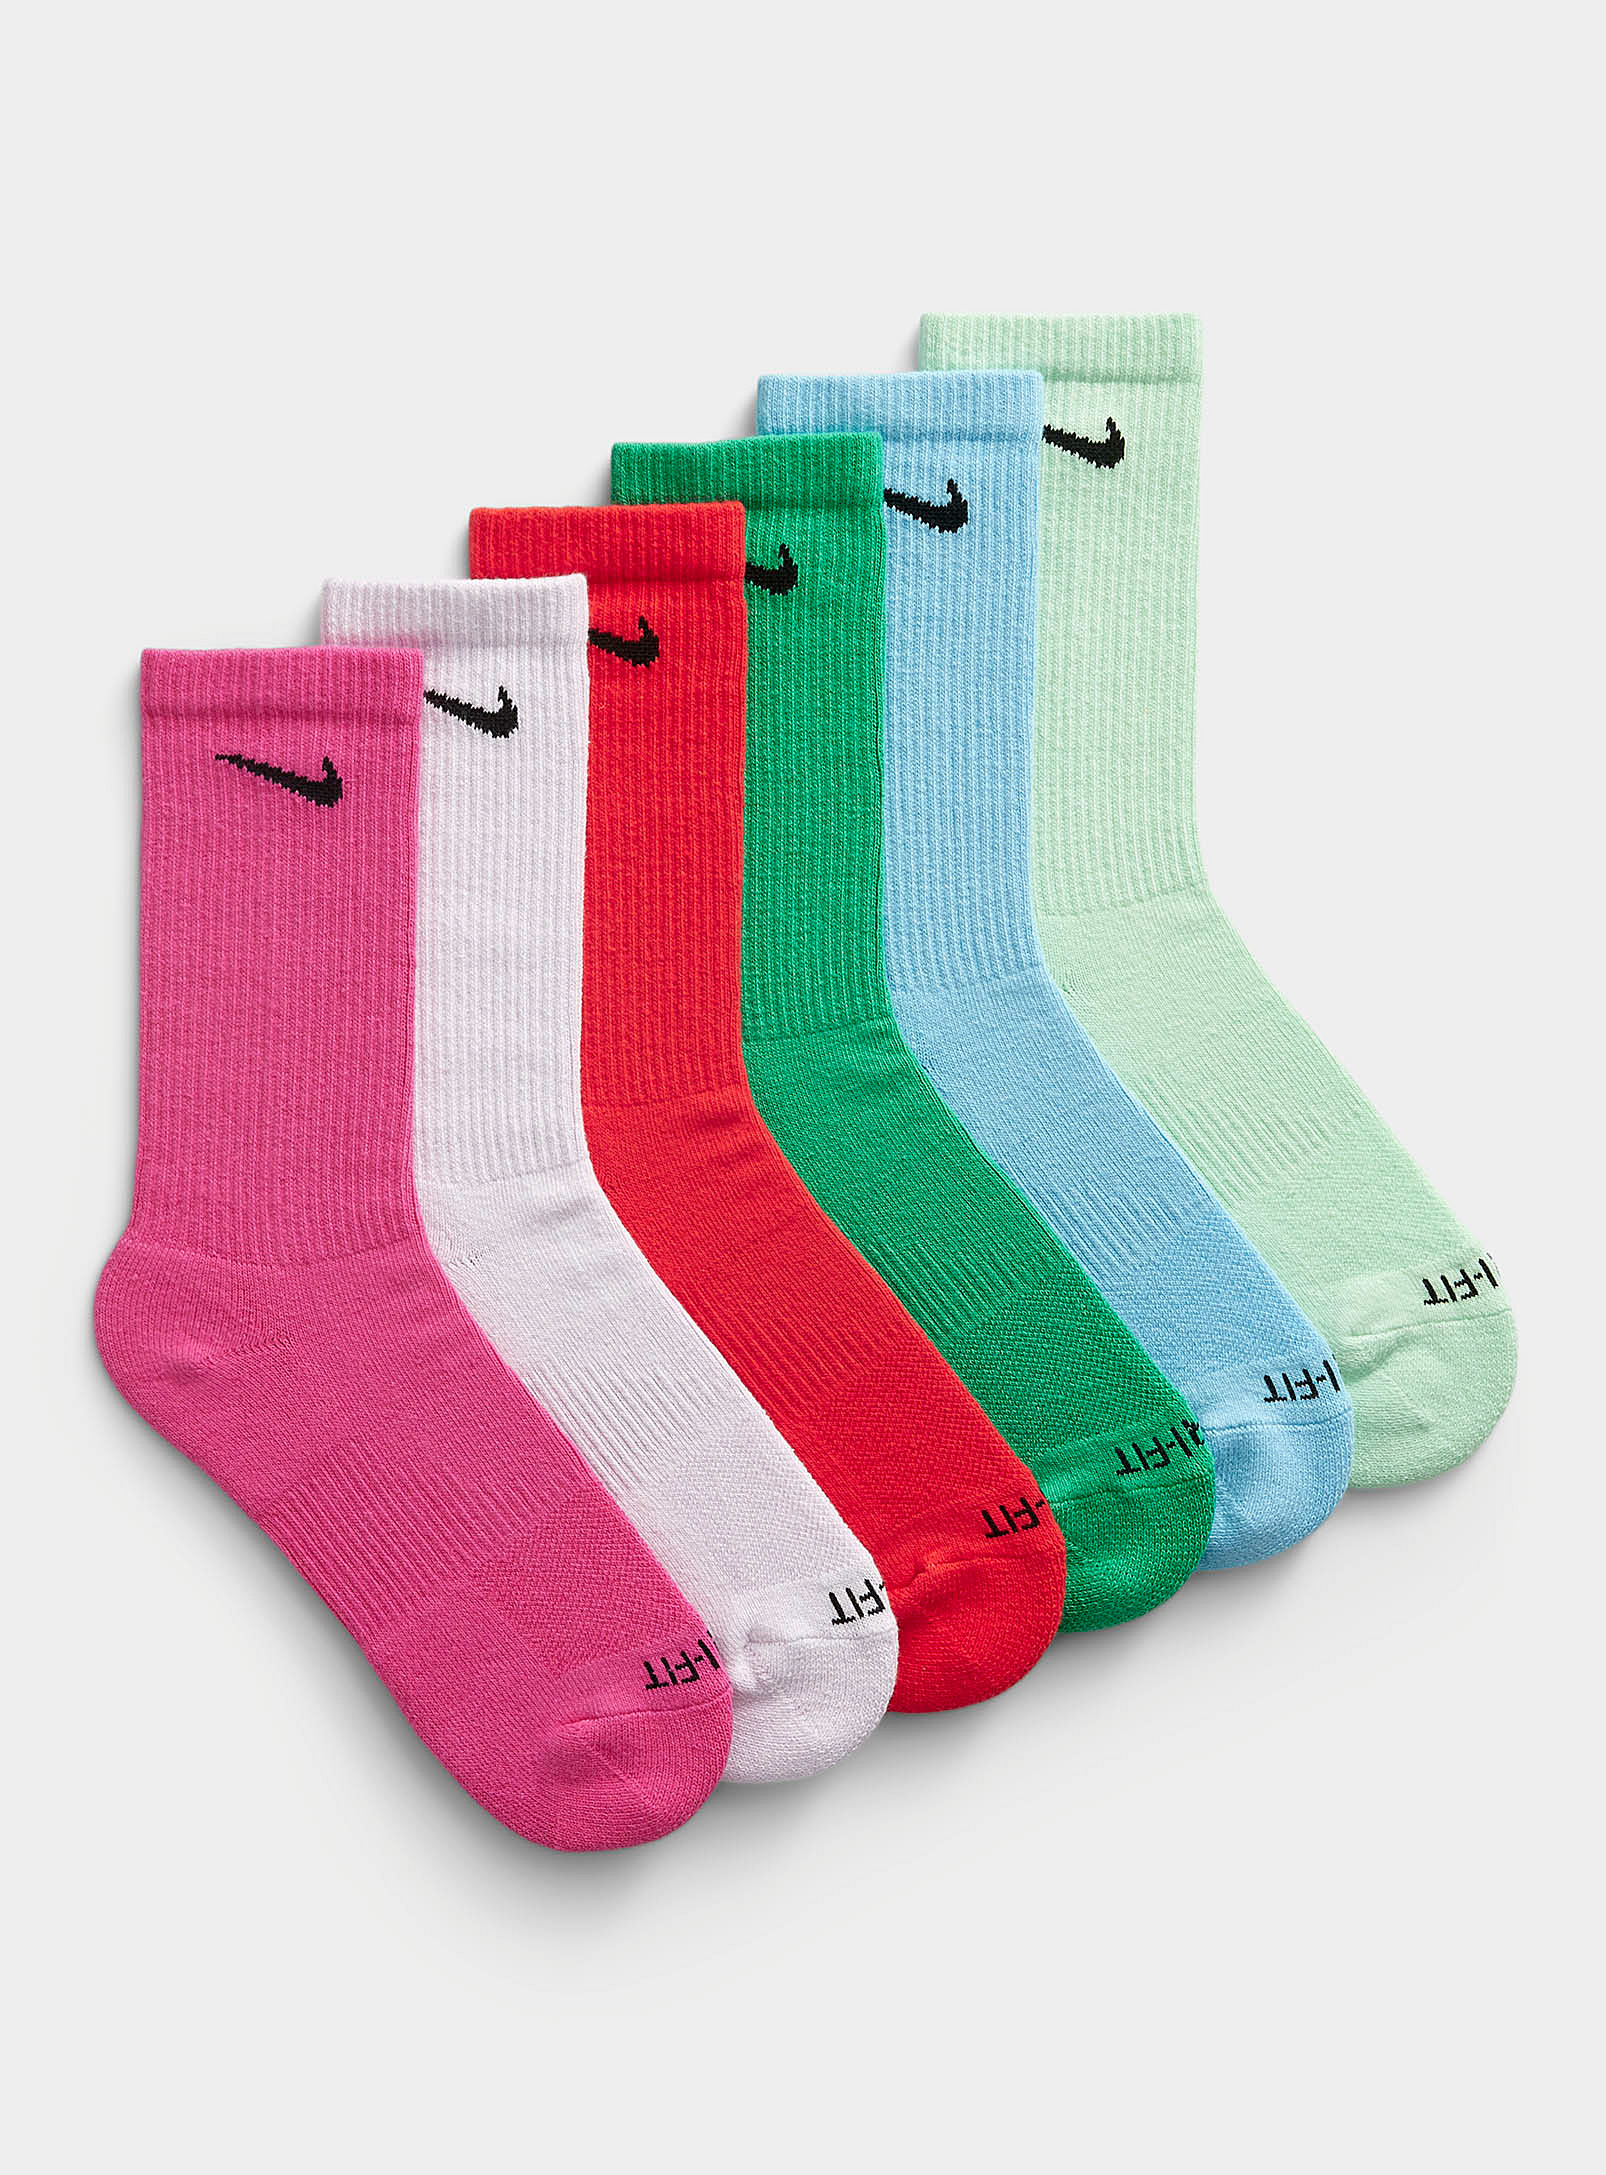 Nike Everyday Plus Colourful Socks 6-pack In Patterned Blue